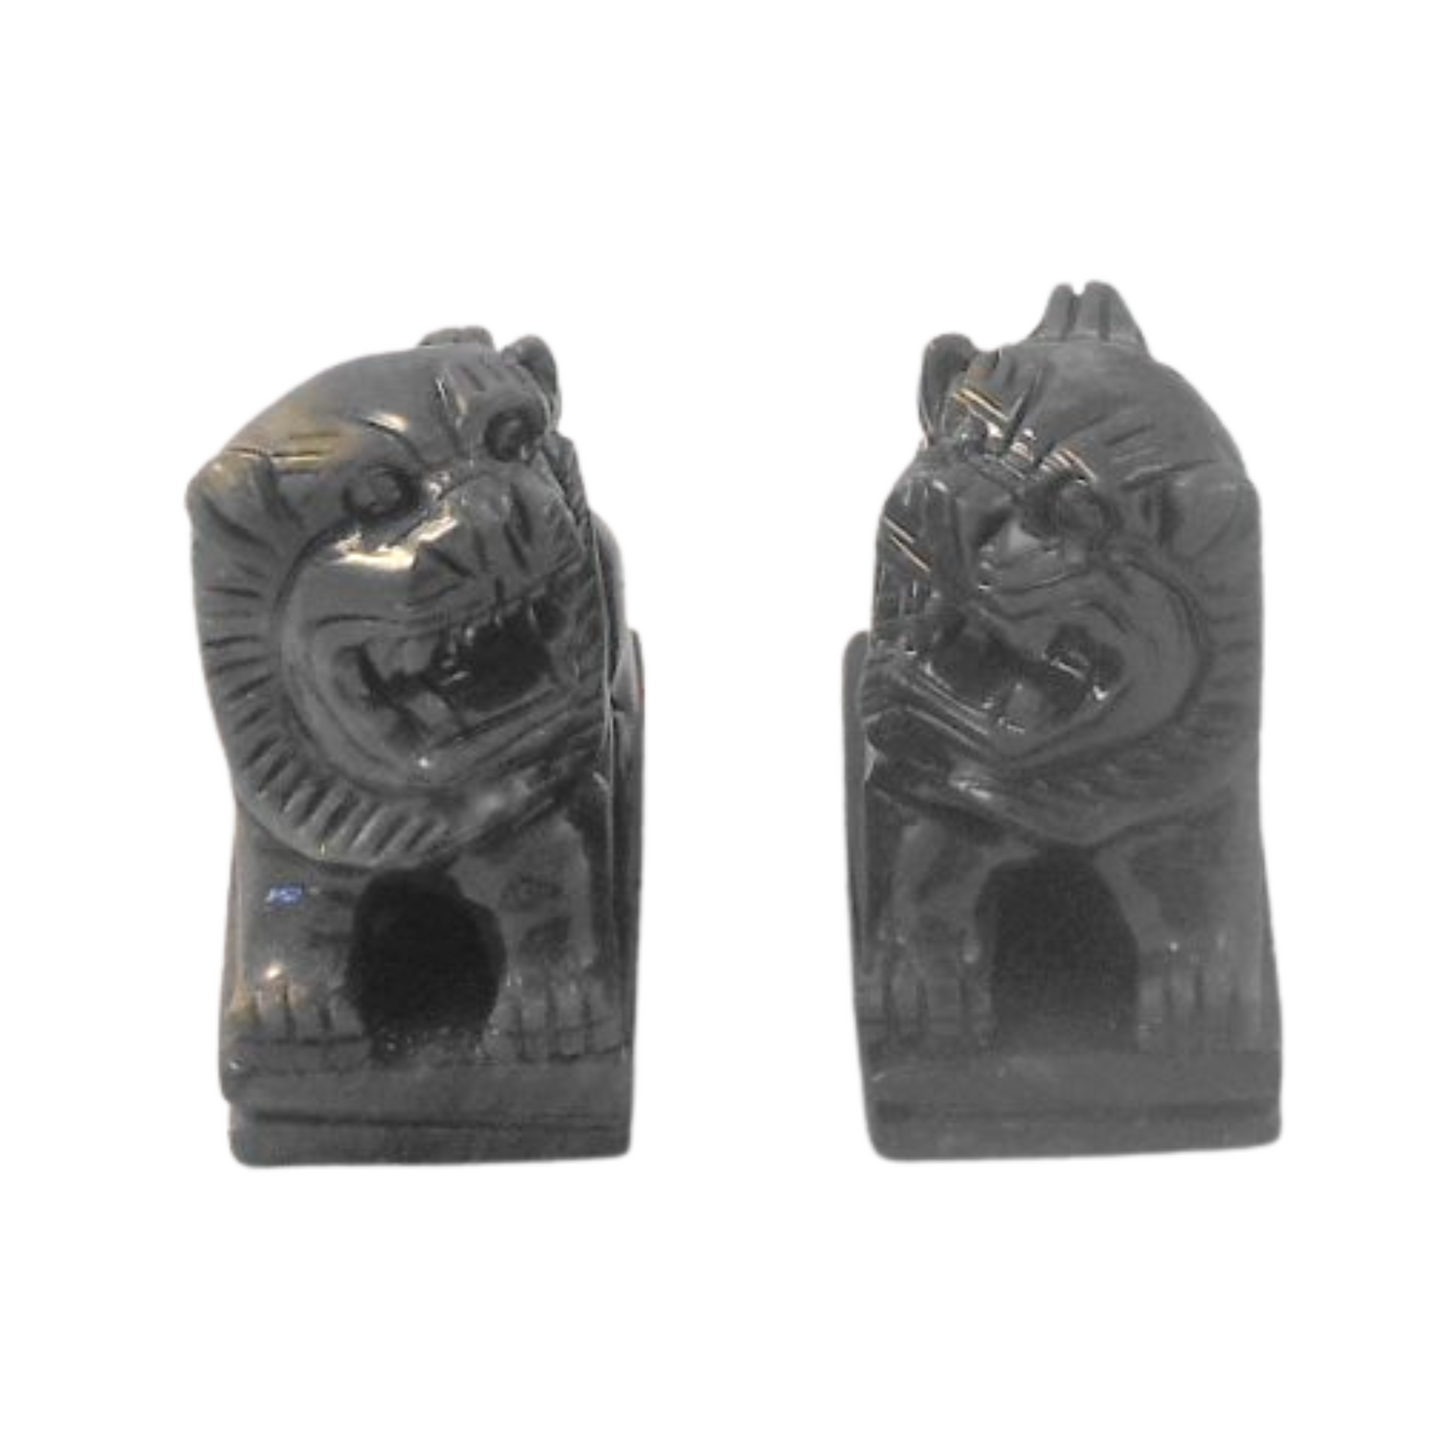 Fire Sale! Foo Dogs Statues Asian Art Small Pair Jade Gemstone Temple Lions Sculptures